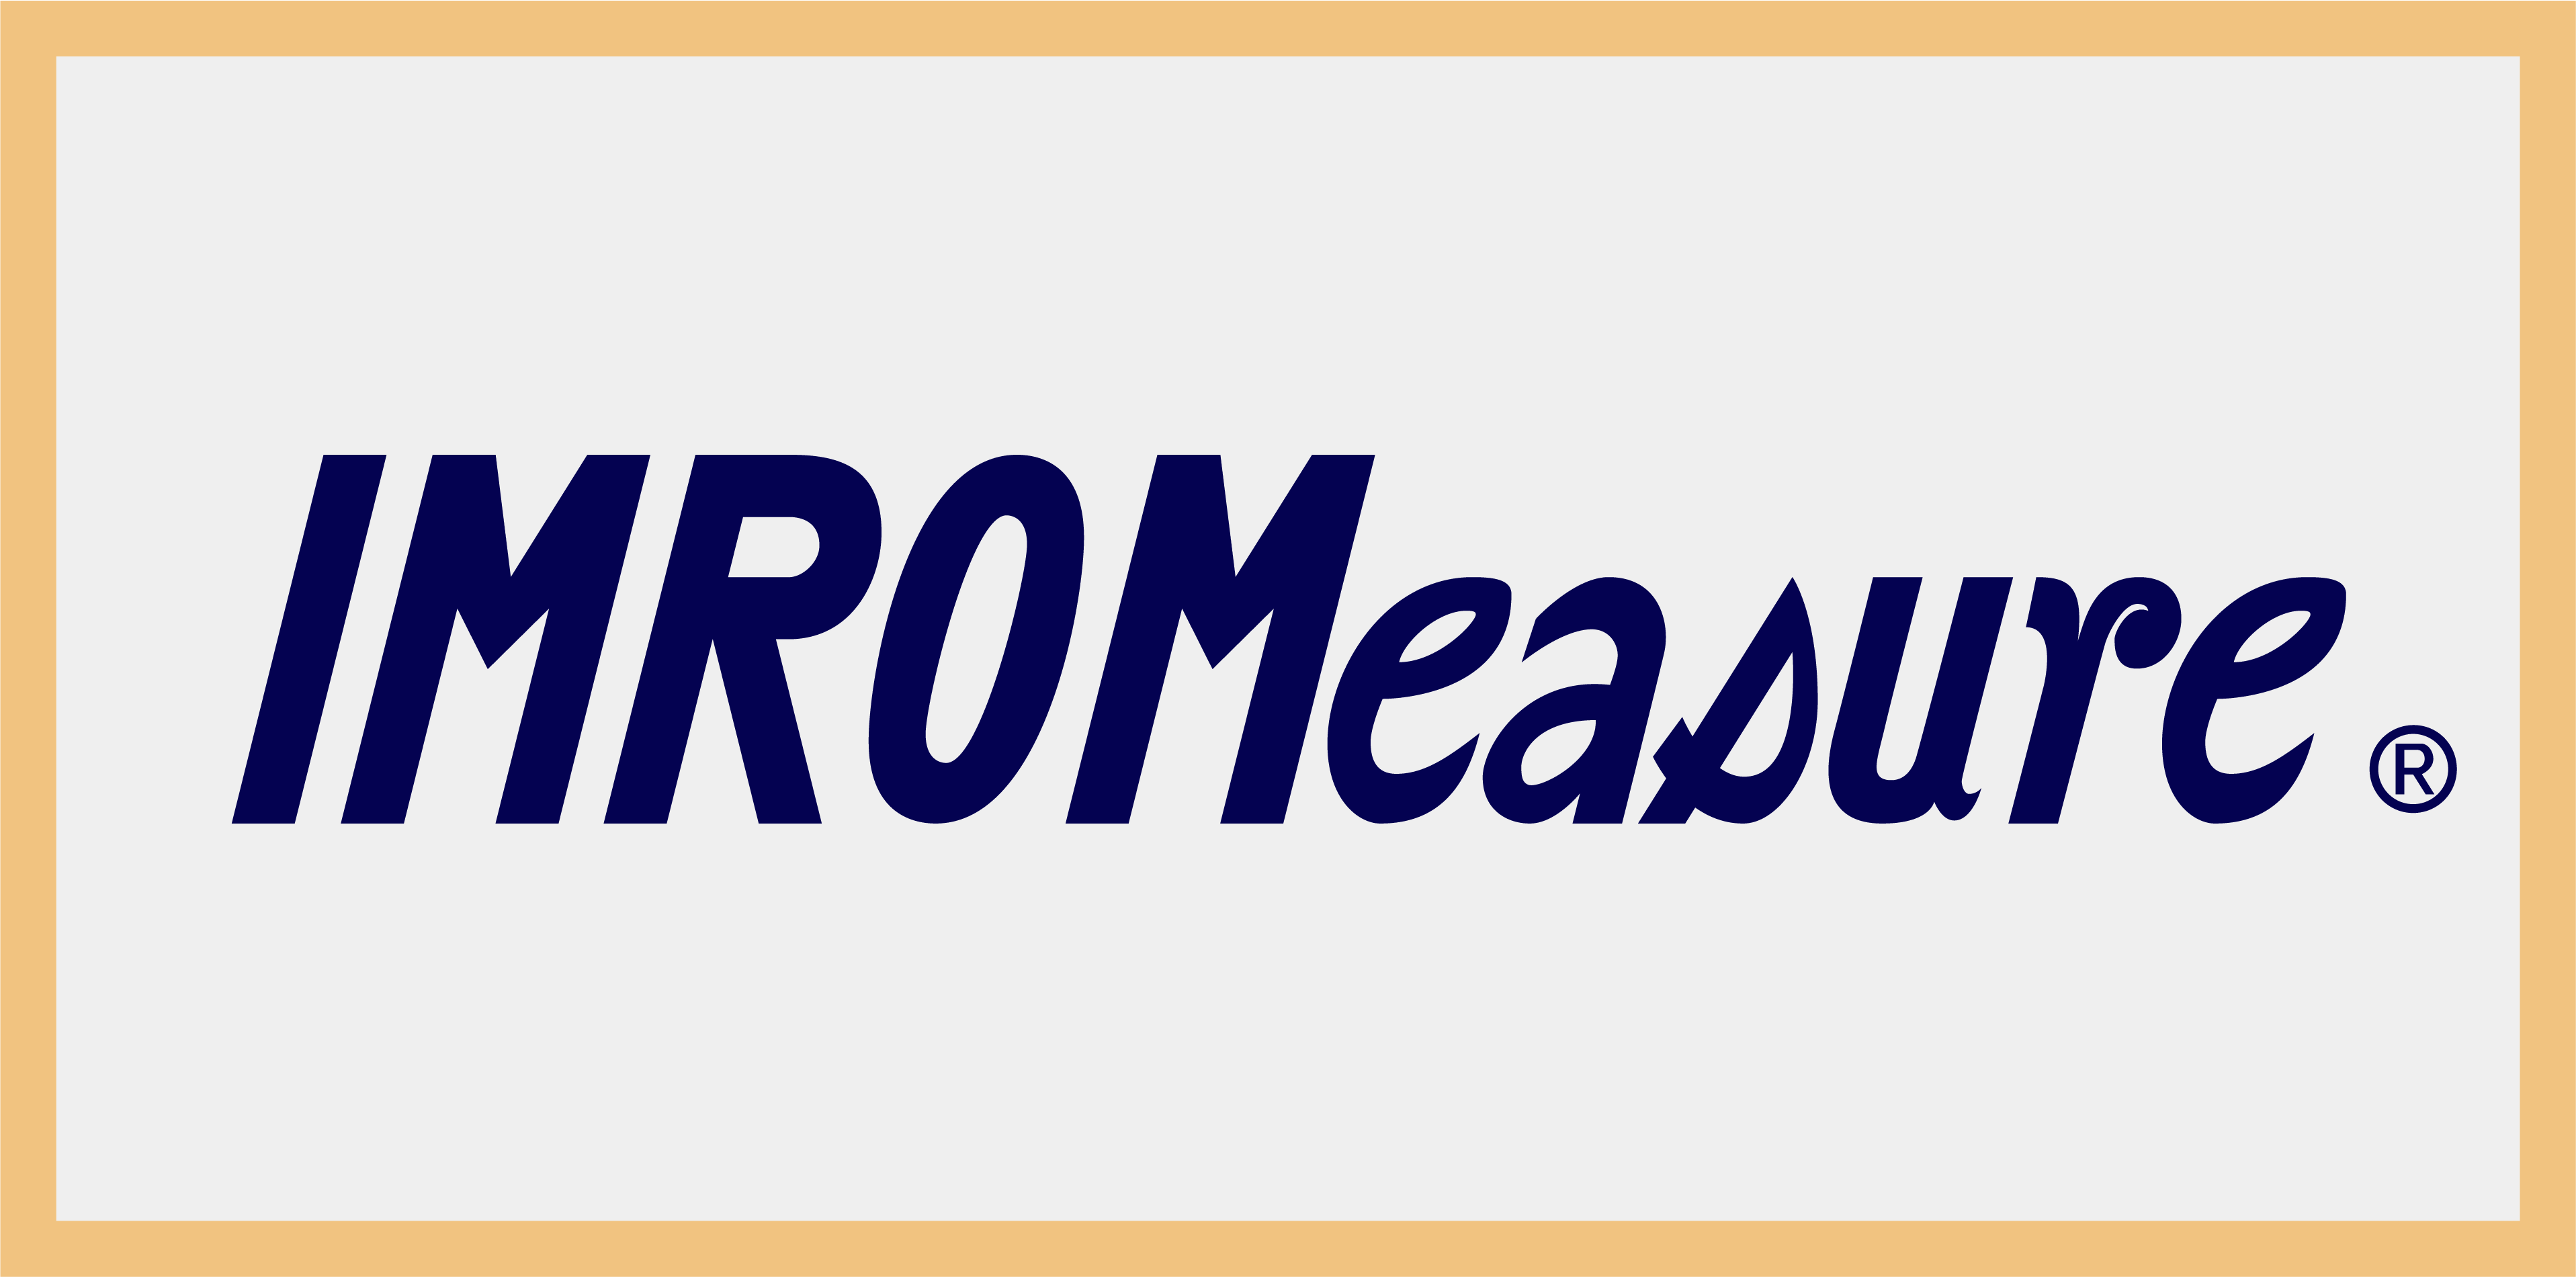 Logo of IMROMEASURE - the technology that builds on the philosophy of measurement